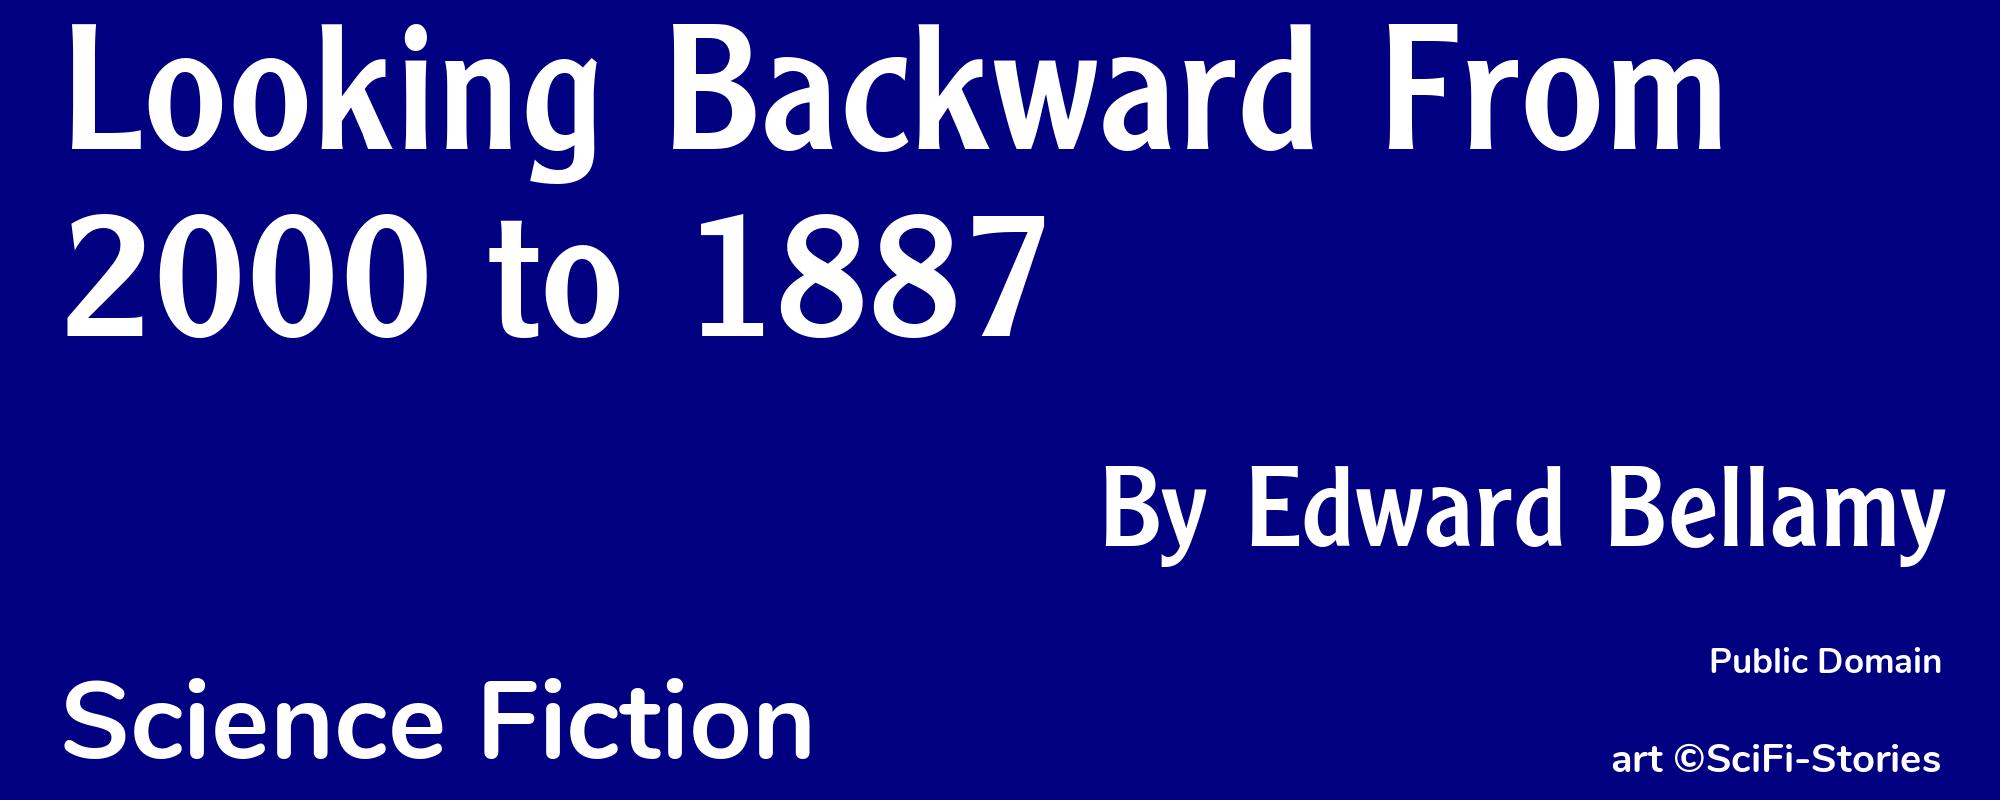 Looking Backward From 2000 to 1887 - Cover